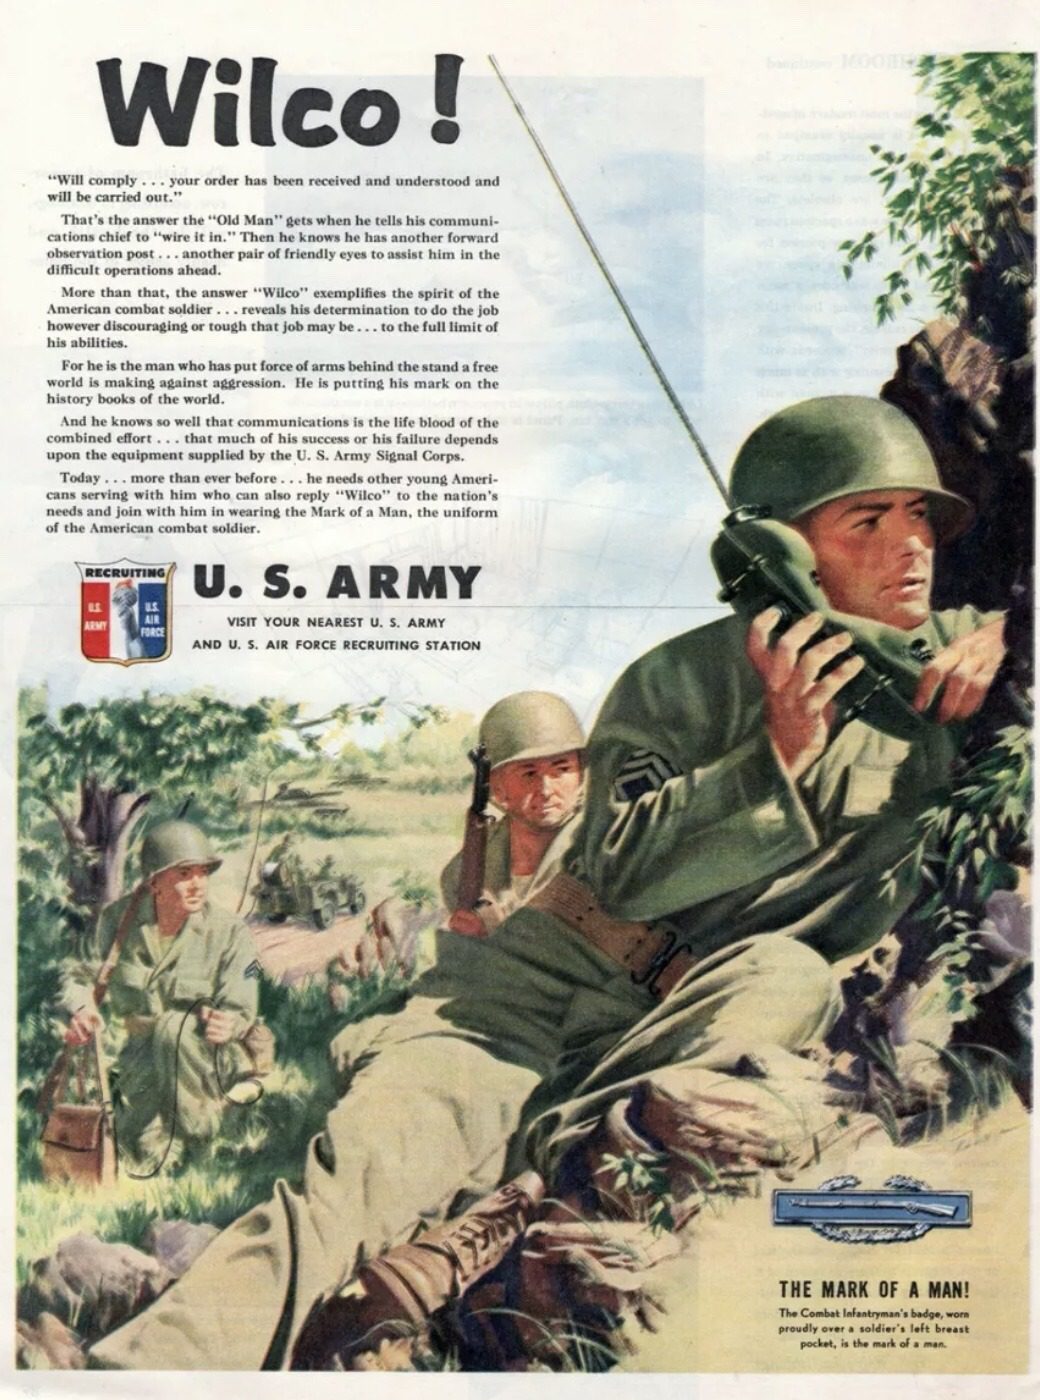 1951 US Army recruitment advertising